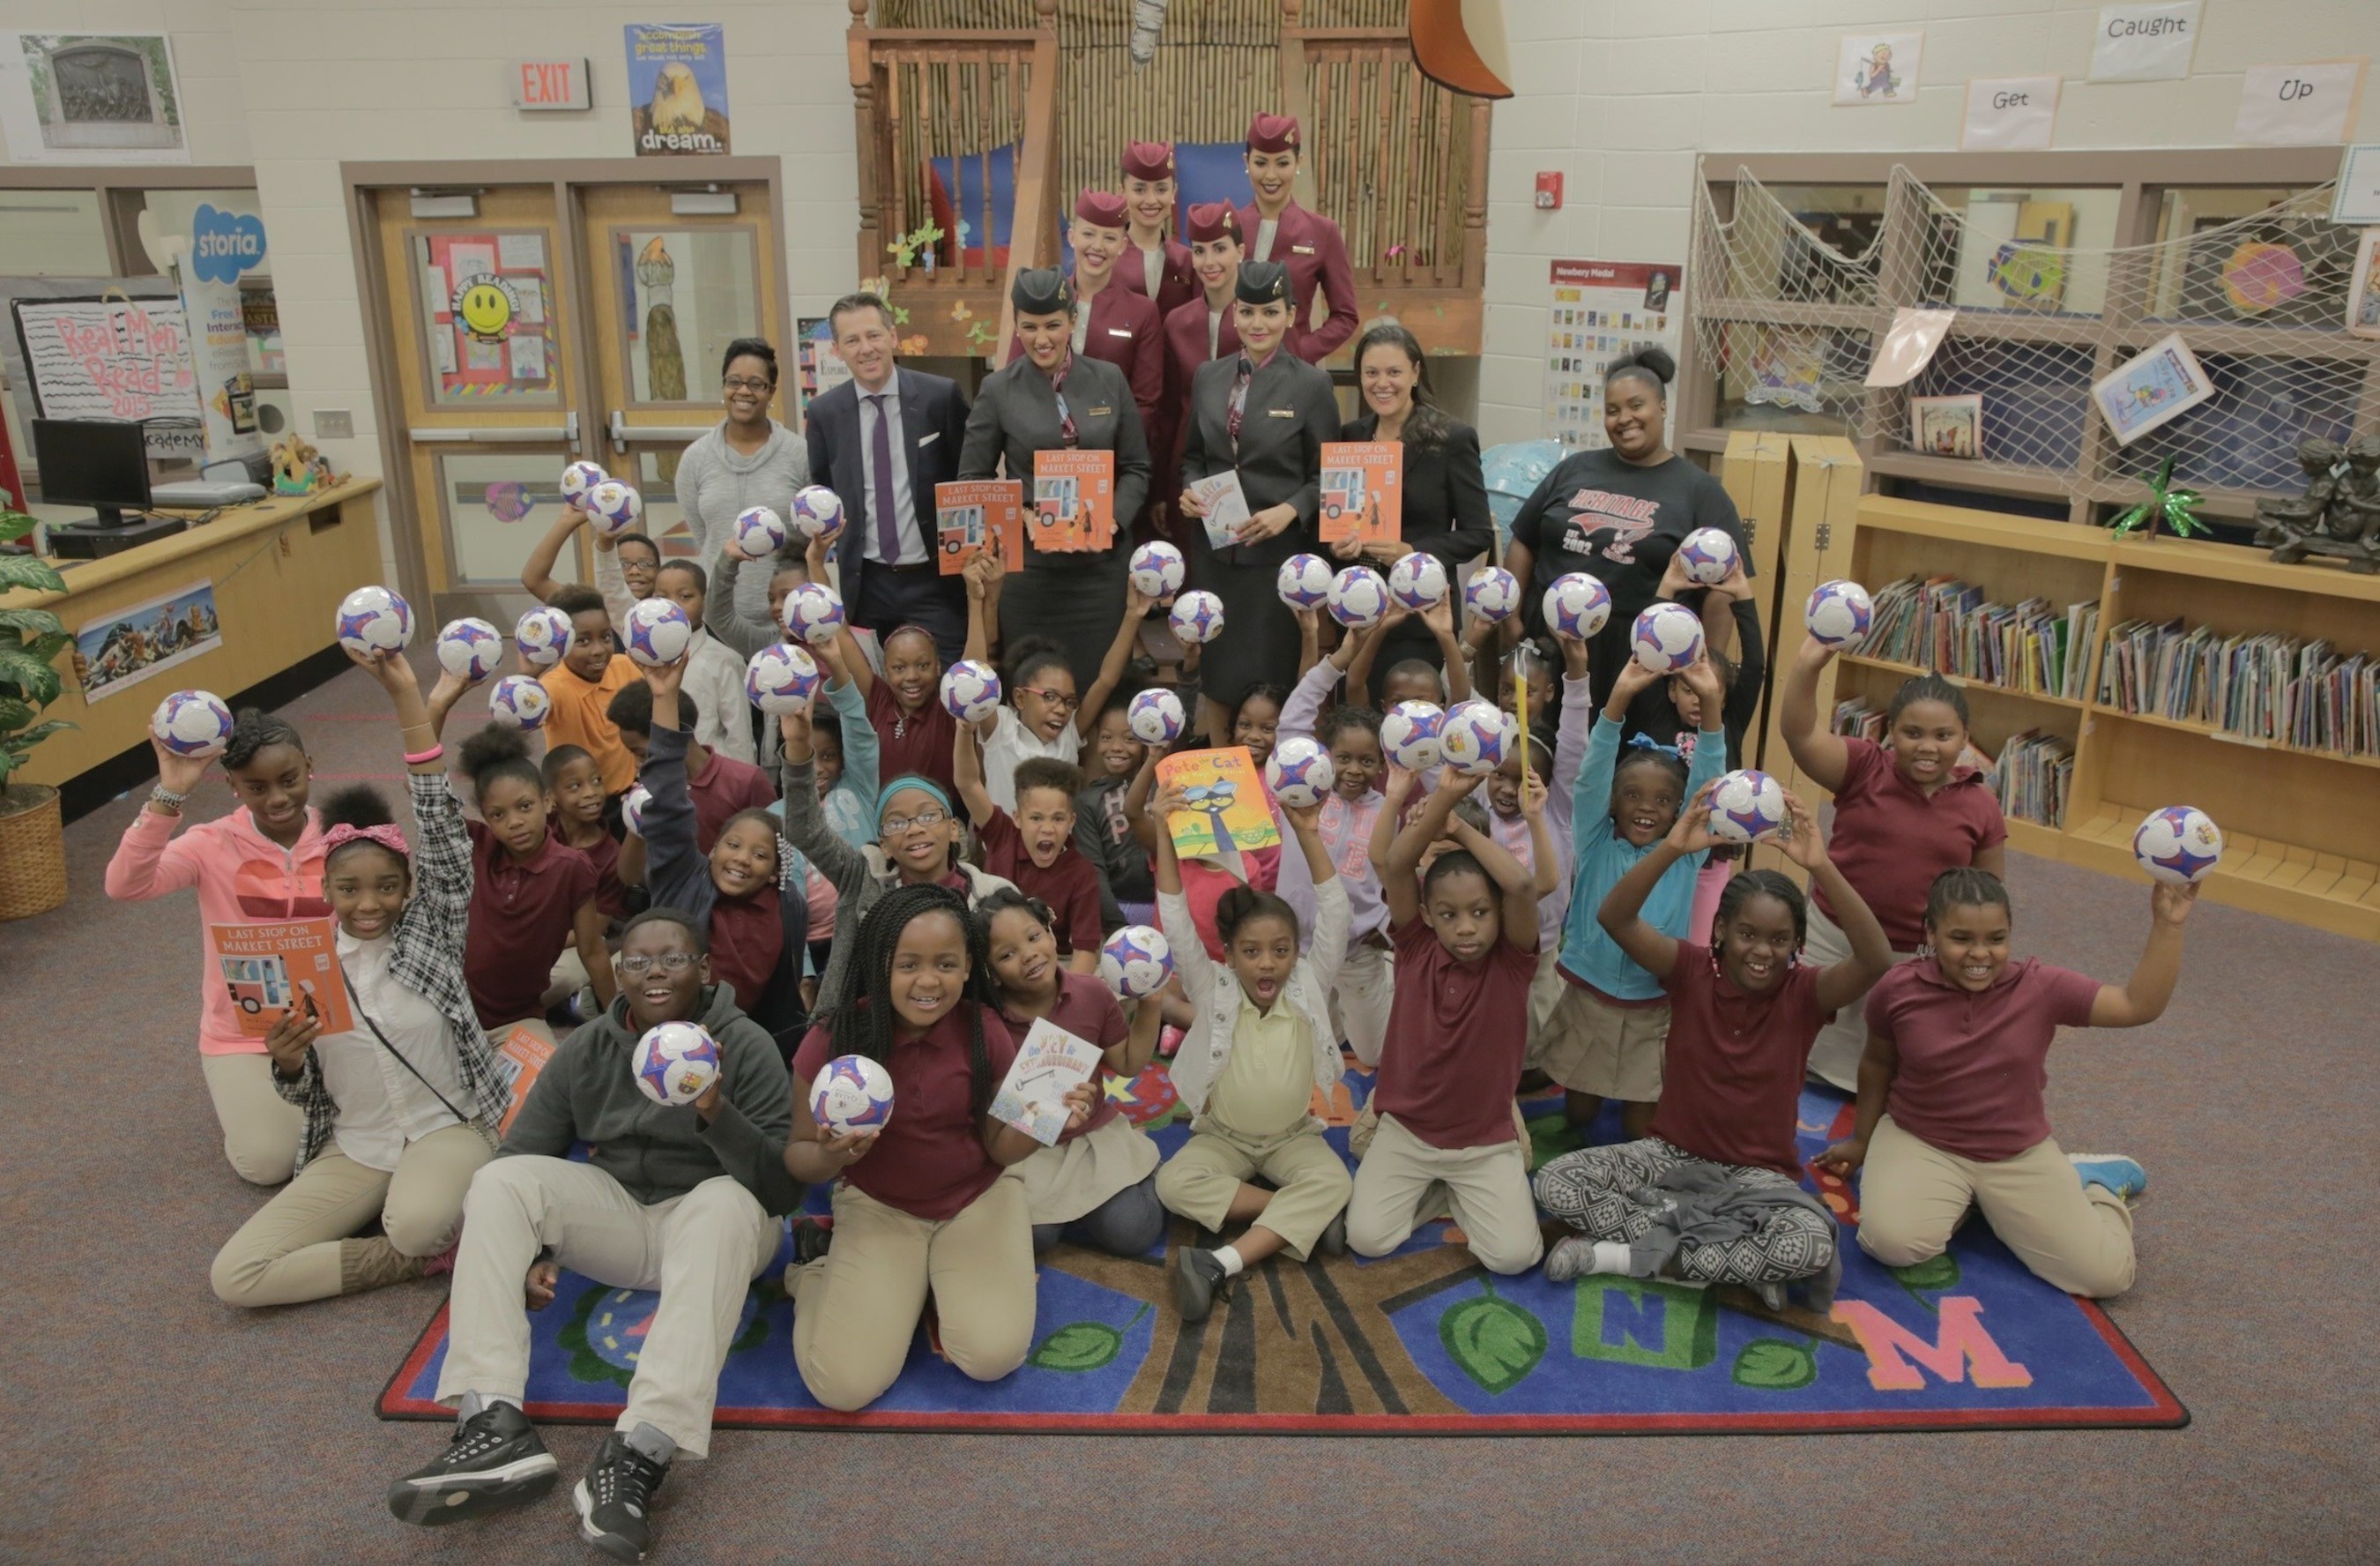 Mr. Gunter Saurwein, Qatar Airways' Vice President of the Americas and Atlanta Public Schools Superintendent, Dr. Meria Carstarphen alongside the students and faculty of Heritage Academy Elementary School